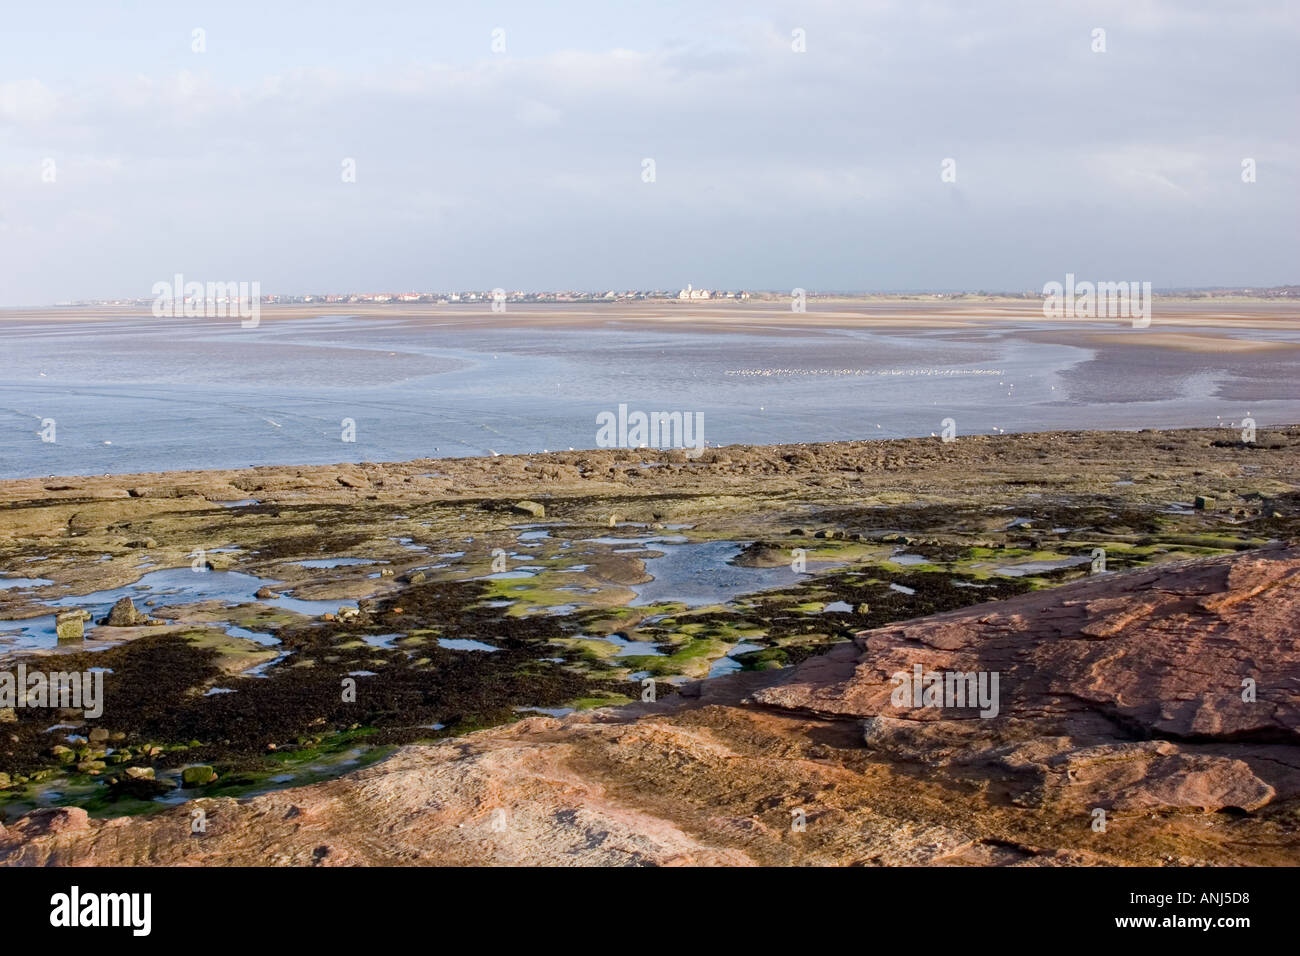 Views across the Dee Estuary from Hilbre Island Stock Photo